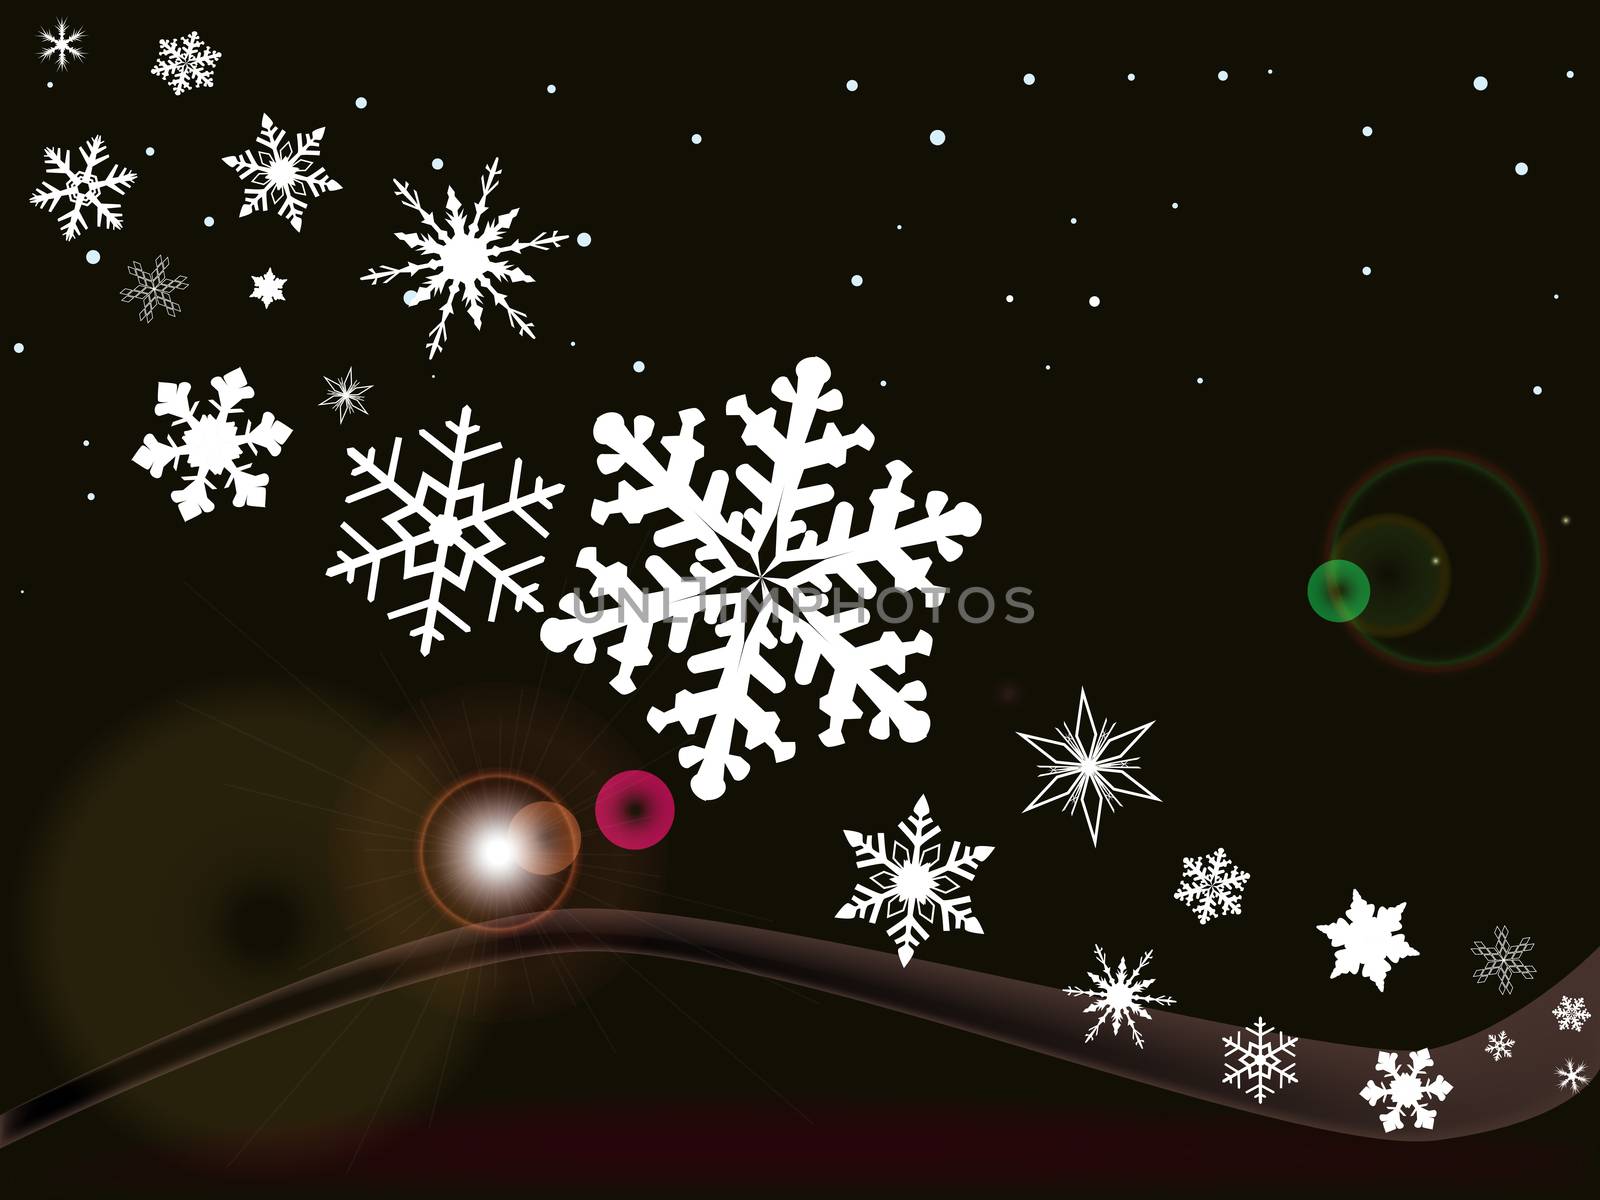 A Christmas Winter background with snowflakes and falling snow